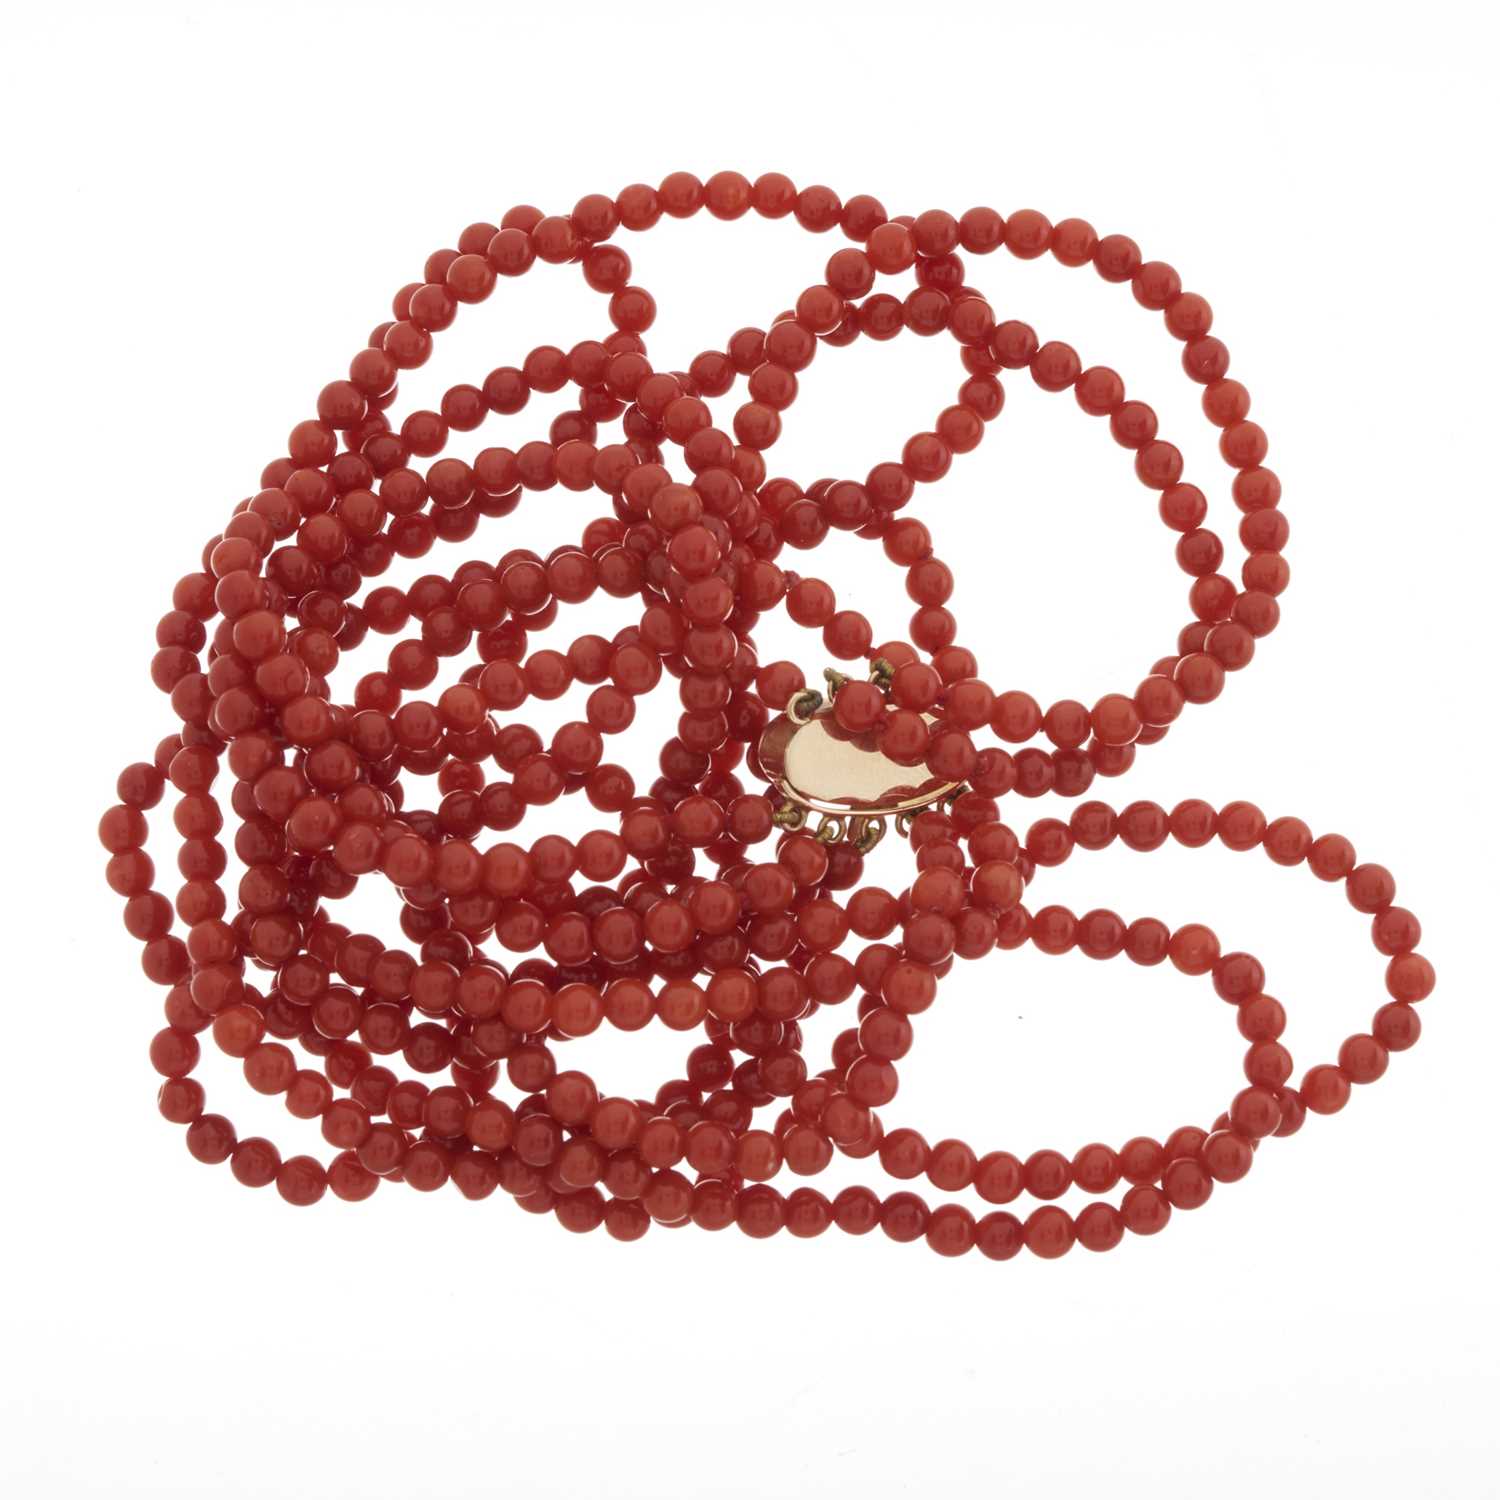 A mid 20th century coral multi-row necklace, with gold clasp - Image 2 of 2